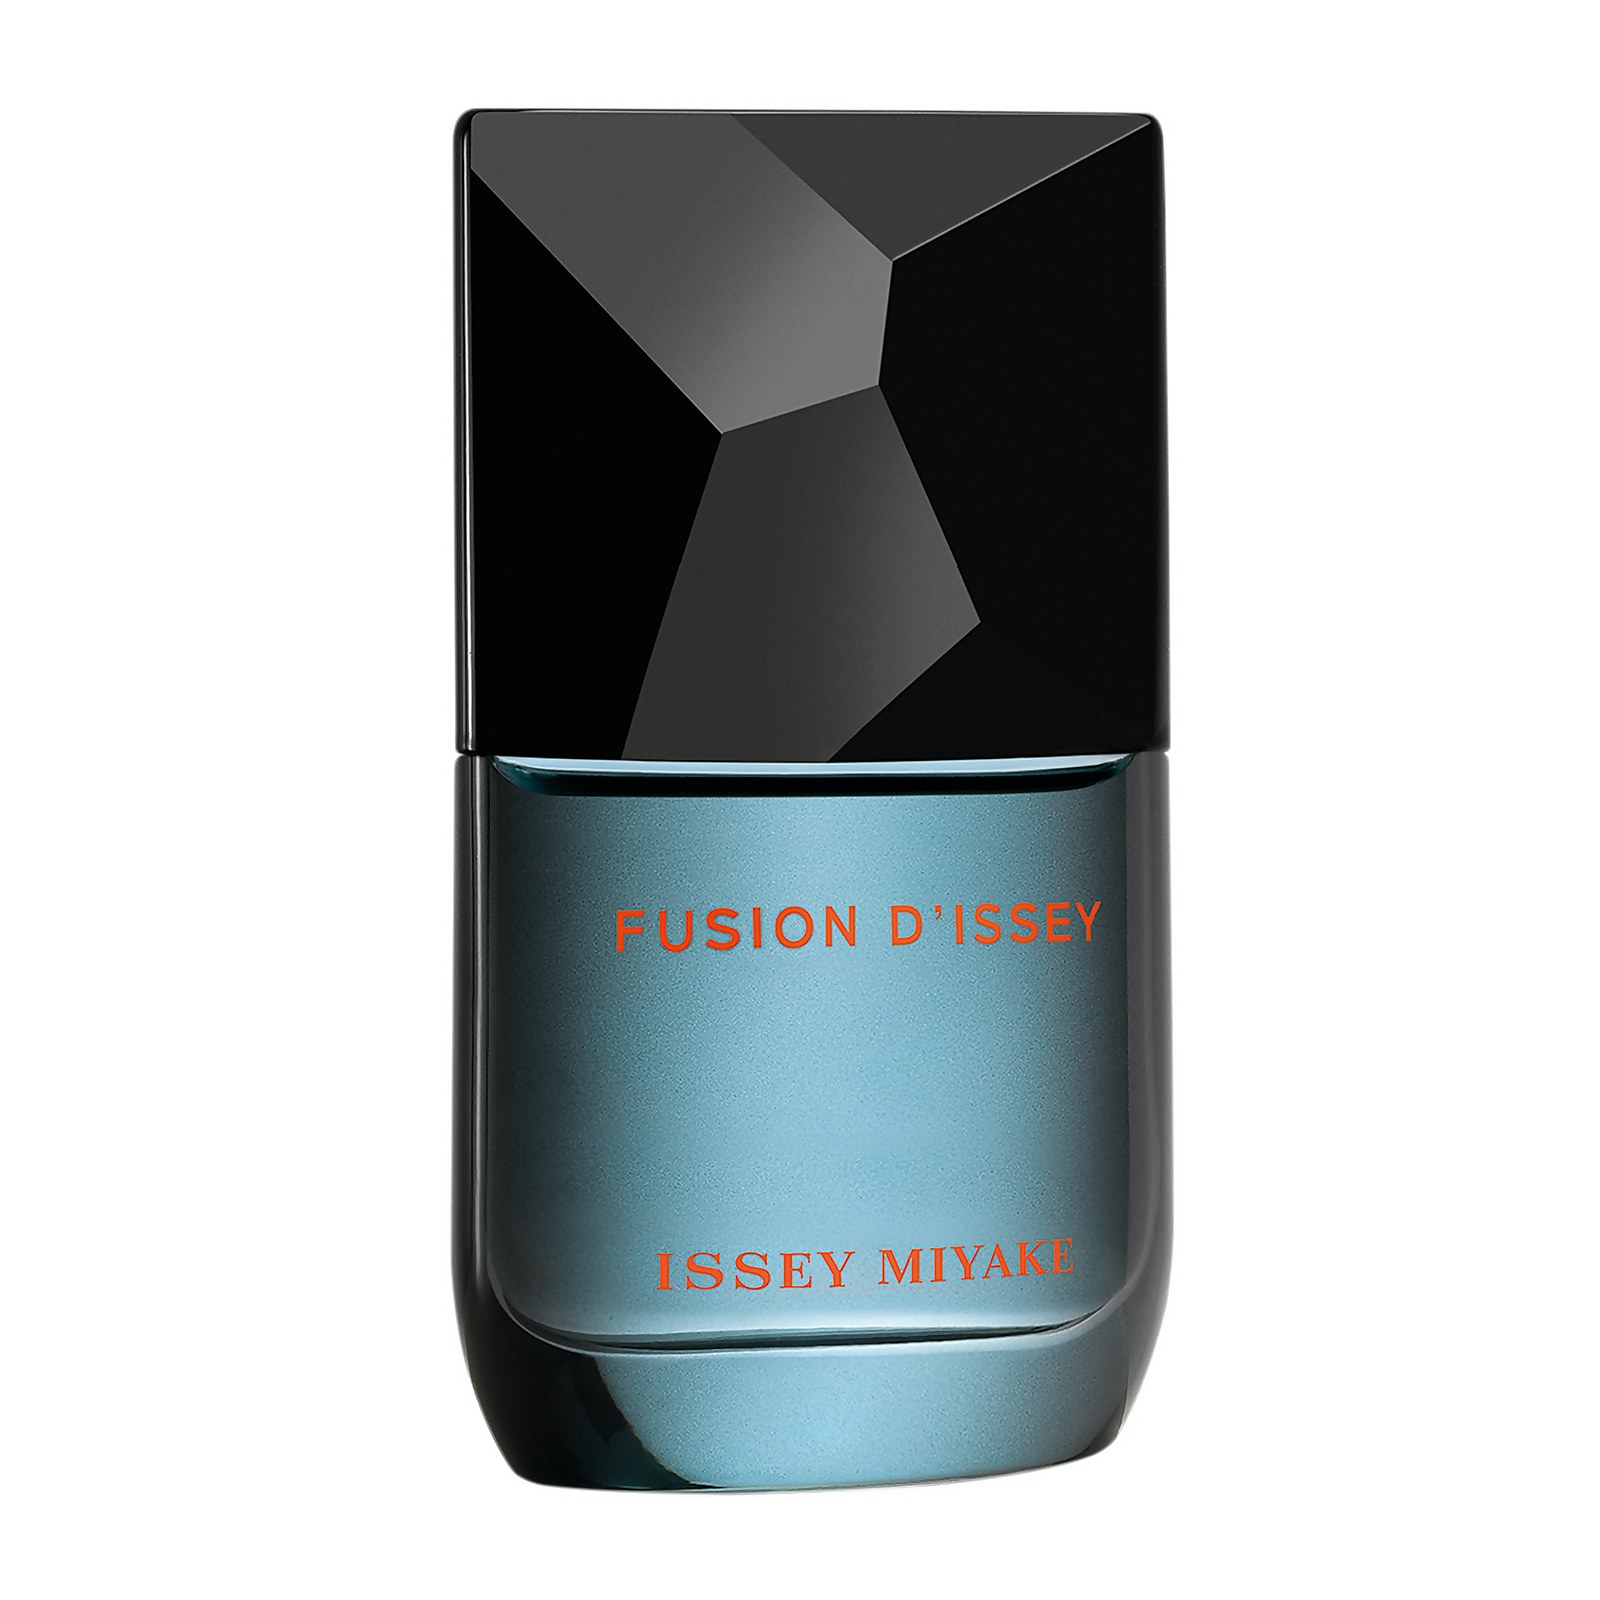 ISSEY MIYAKE Fusion d'Issey Eau de Toilette (Various Sizes) - 50ML